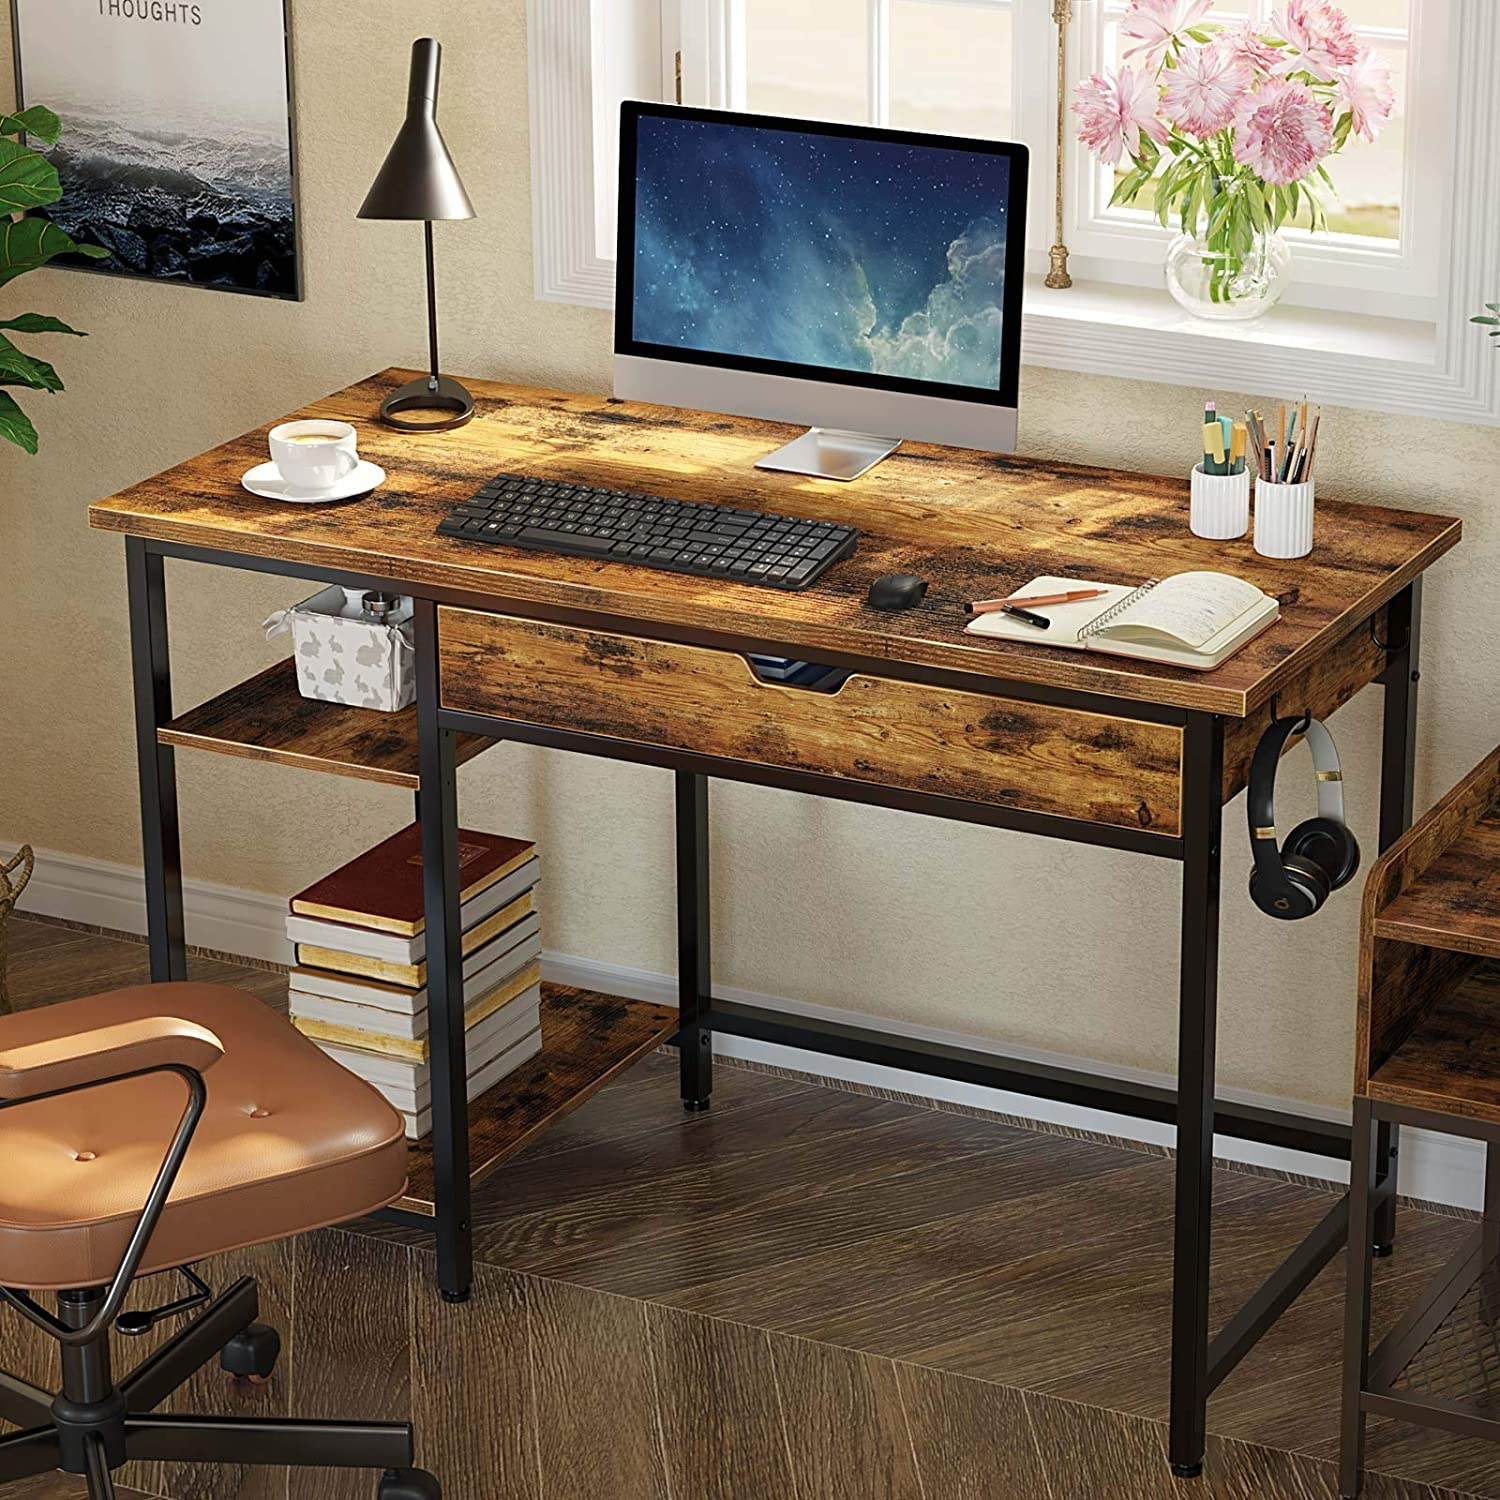 a desk with wooden and metal accents in a stylish room